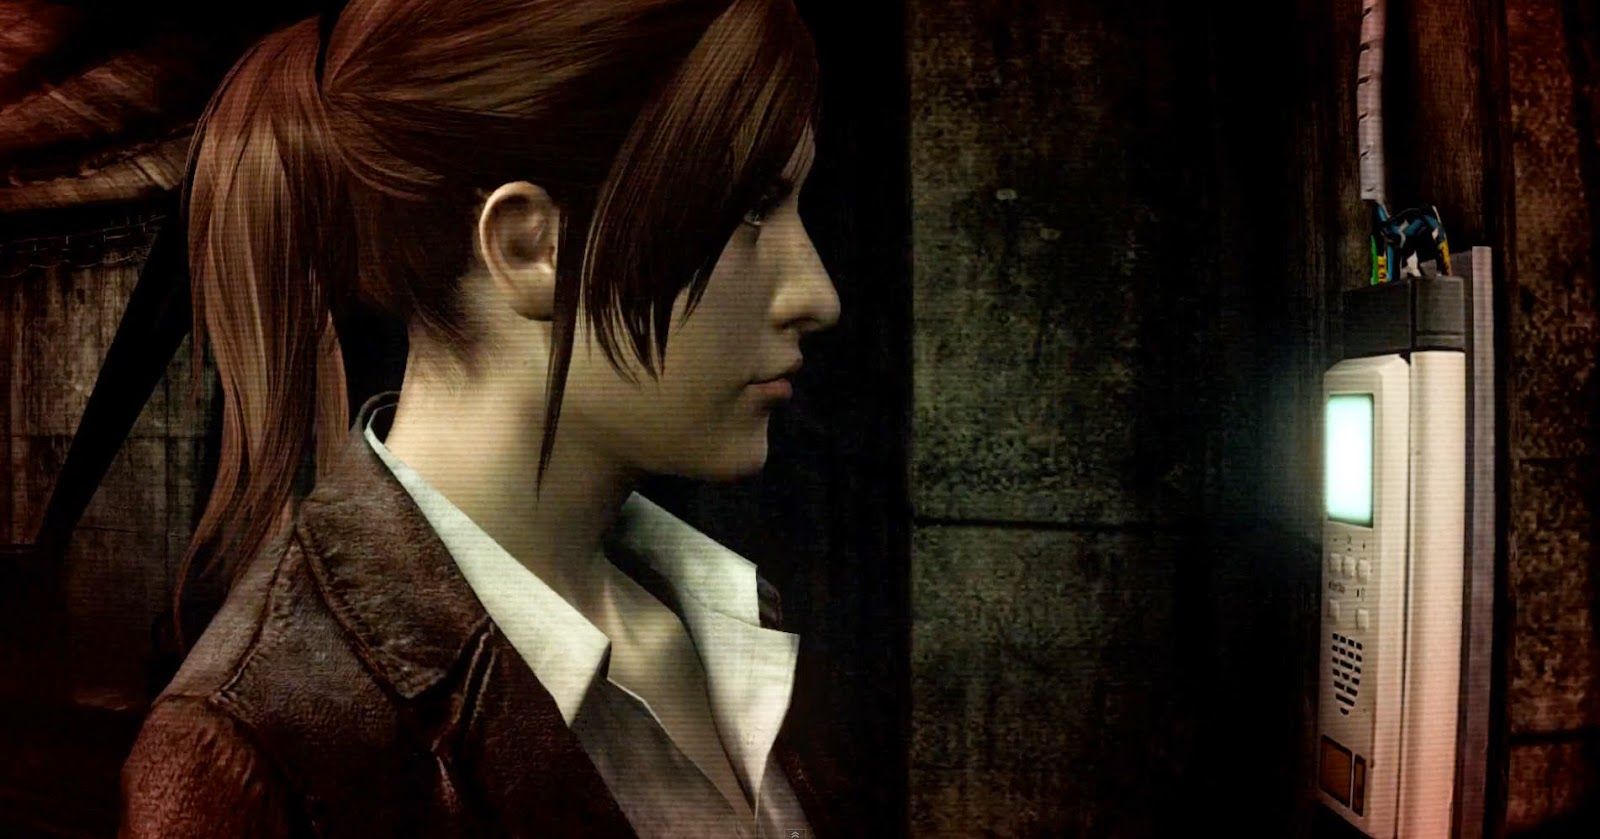 Resident-Evil-Revelations-2-Only-Has-Local-Co-Op-No-Online-Mode-Screenshots-459173-4